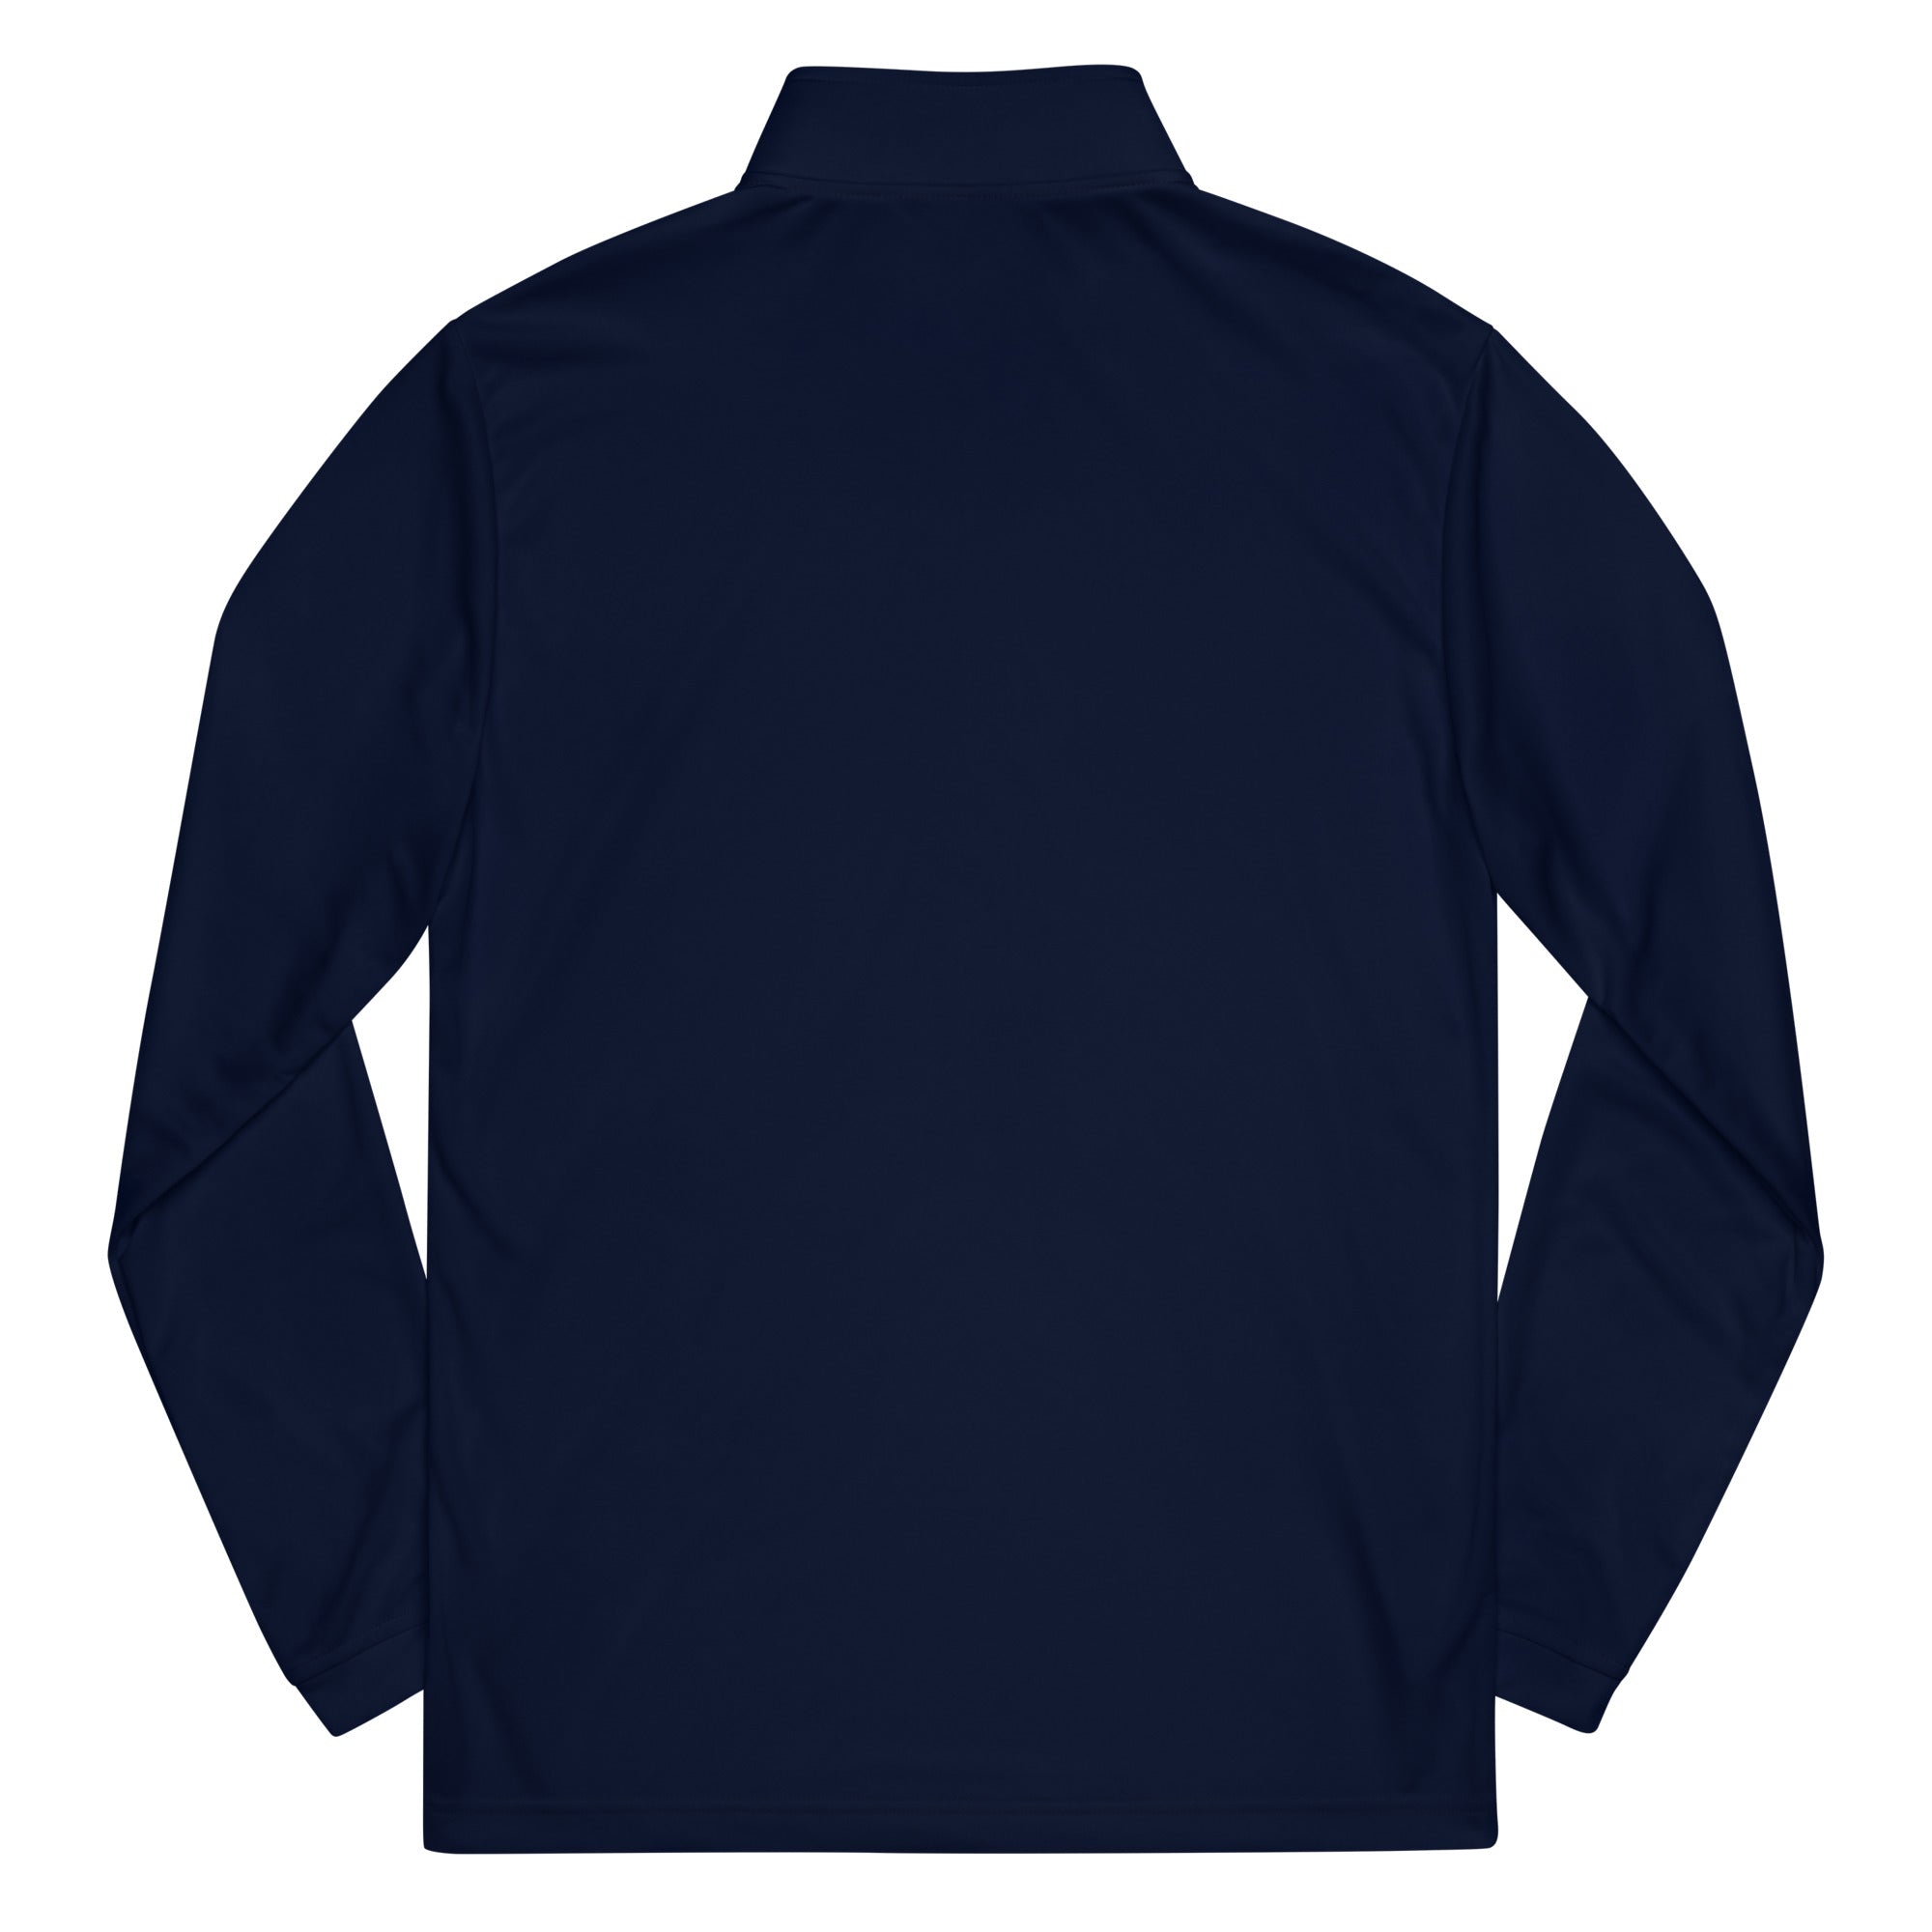 "Life's Better When You're Swimming" Quarter zip pullover